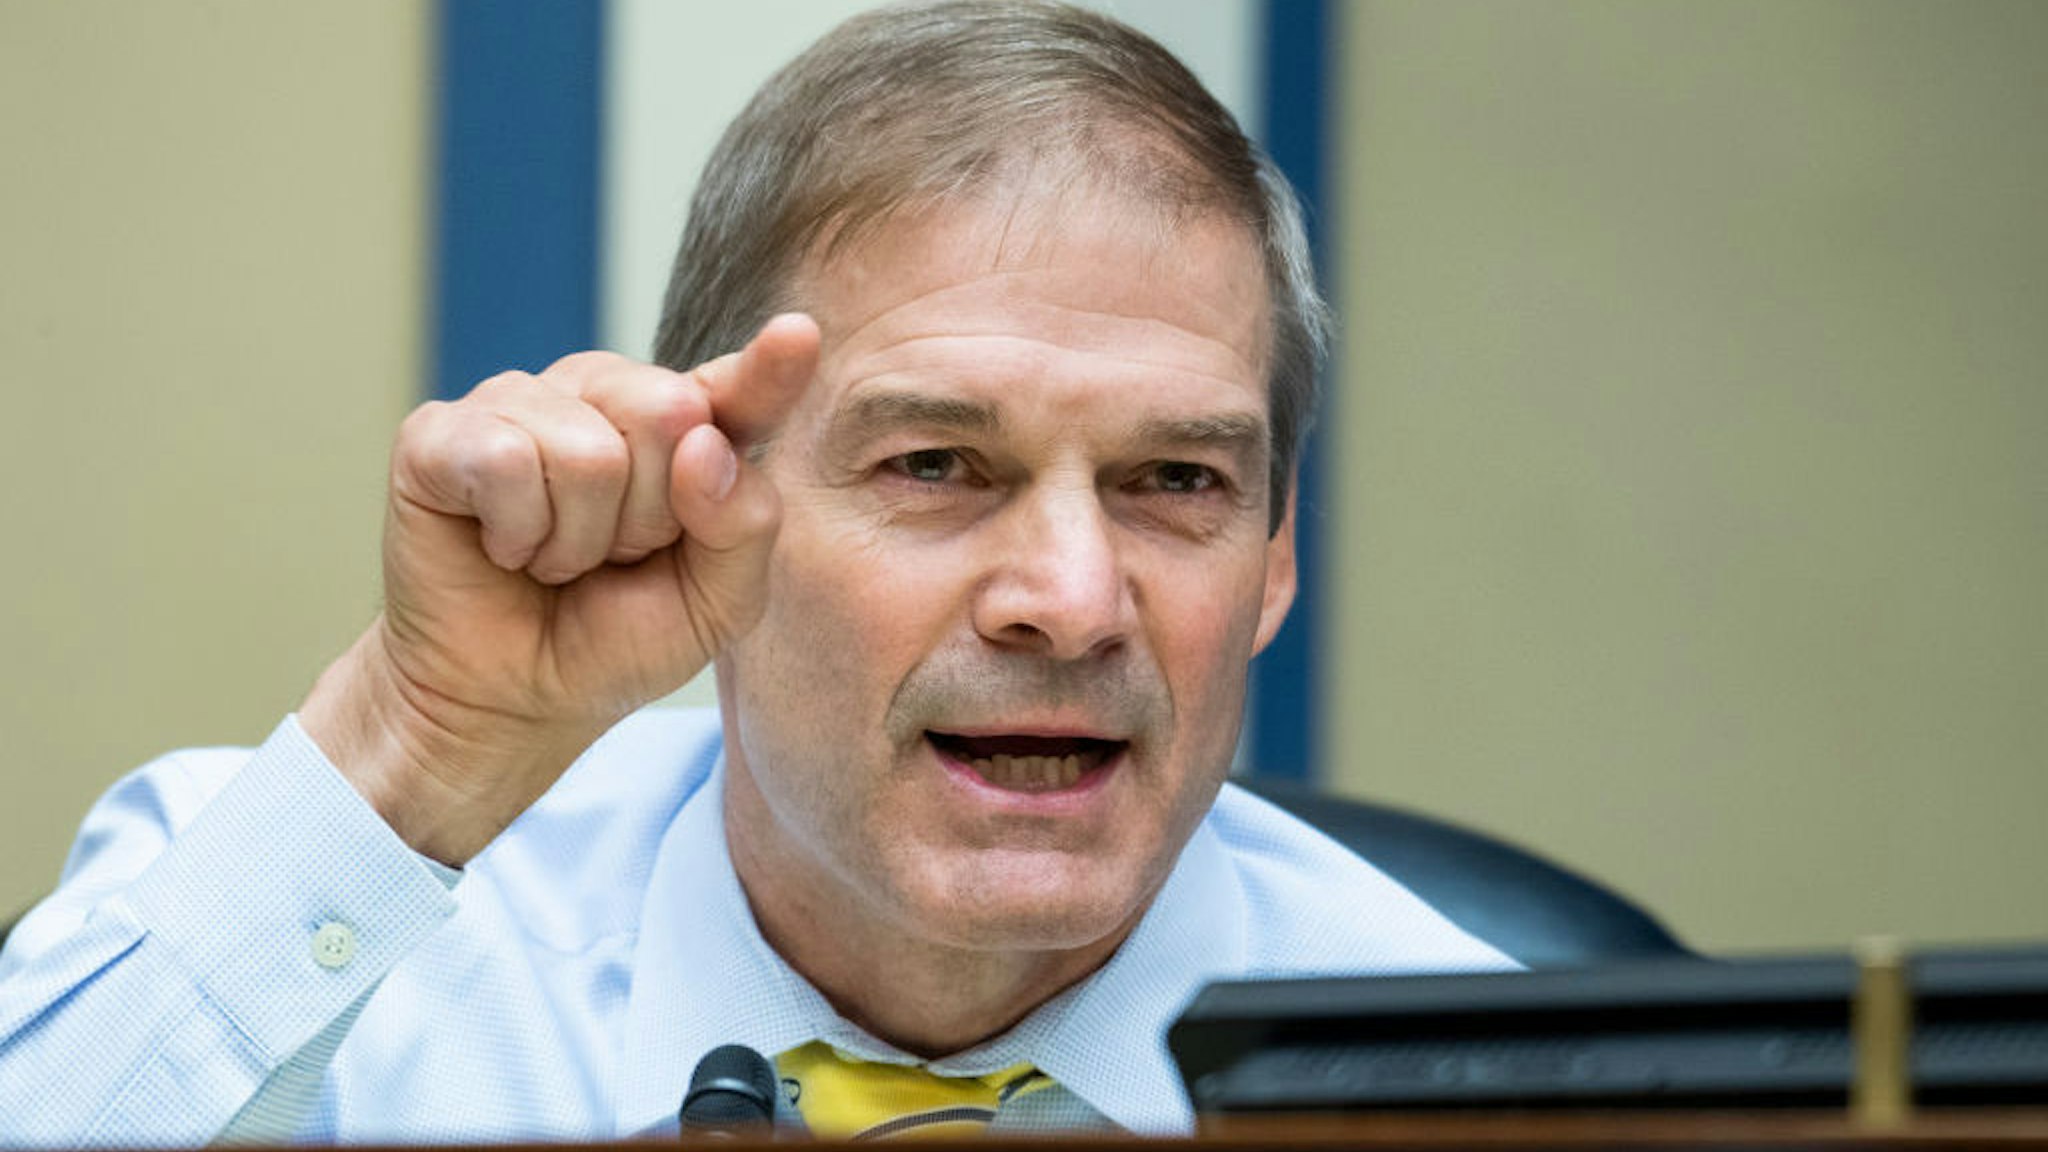 UNITED STATES - AUGUST 24: Rep. Jim Jordan, R-Ohio, questions Postmaster General Louis DeJoy during the House Oversight and Reform Committee hearing titled “Protecting the Timely Delivery of Mail, Medicine, and Mail-in Ballots,” in Rayburn House Office Building on Monday, August 24, 2020. (Photo By Tom Williams/CQ Roll Call/Pool)